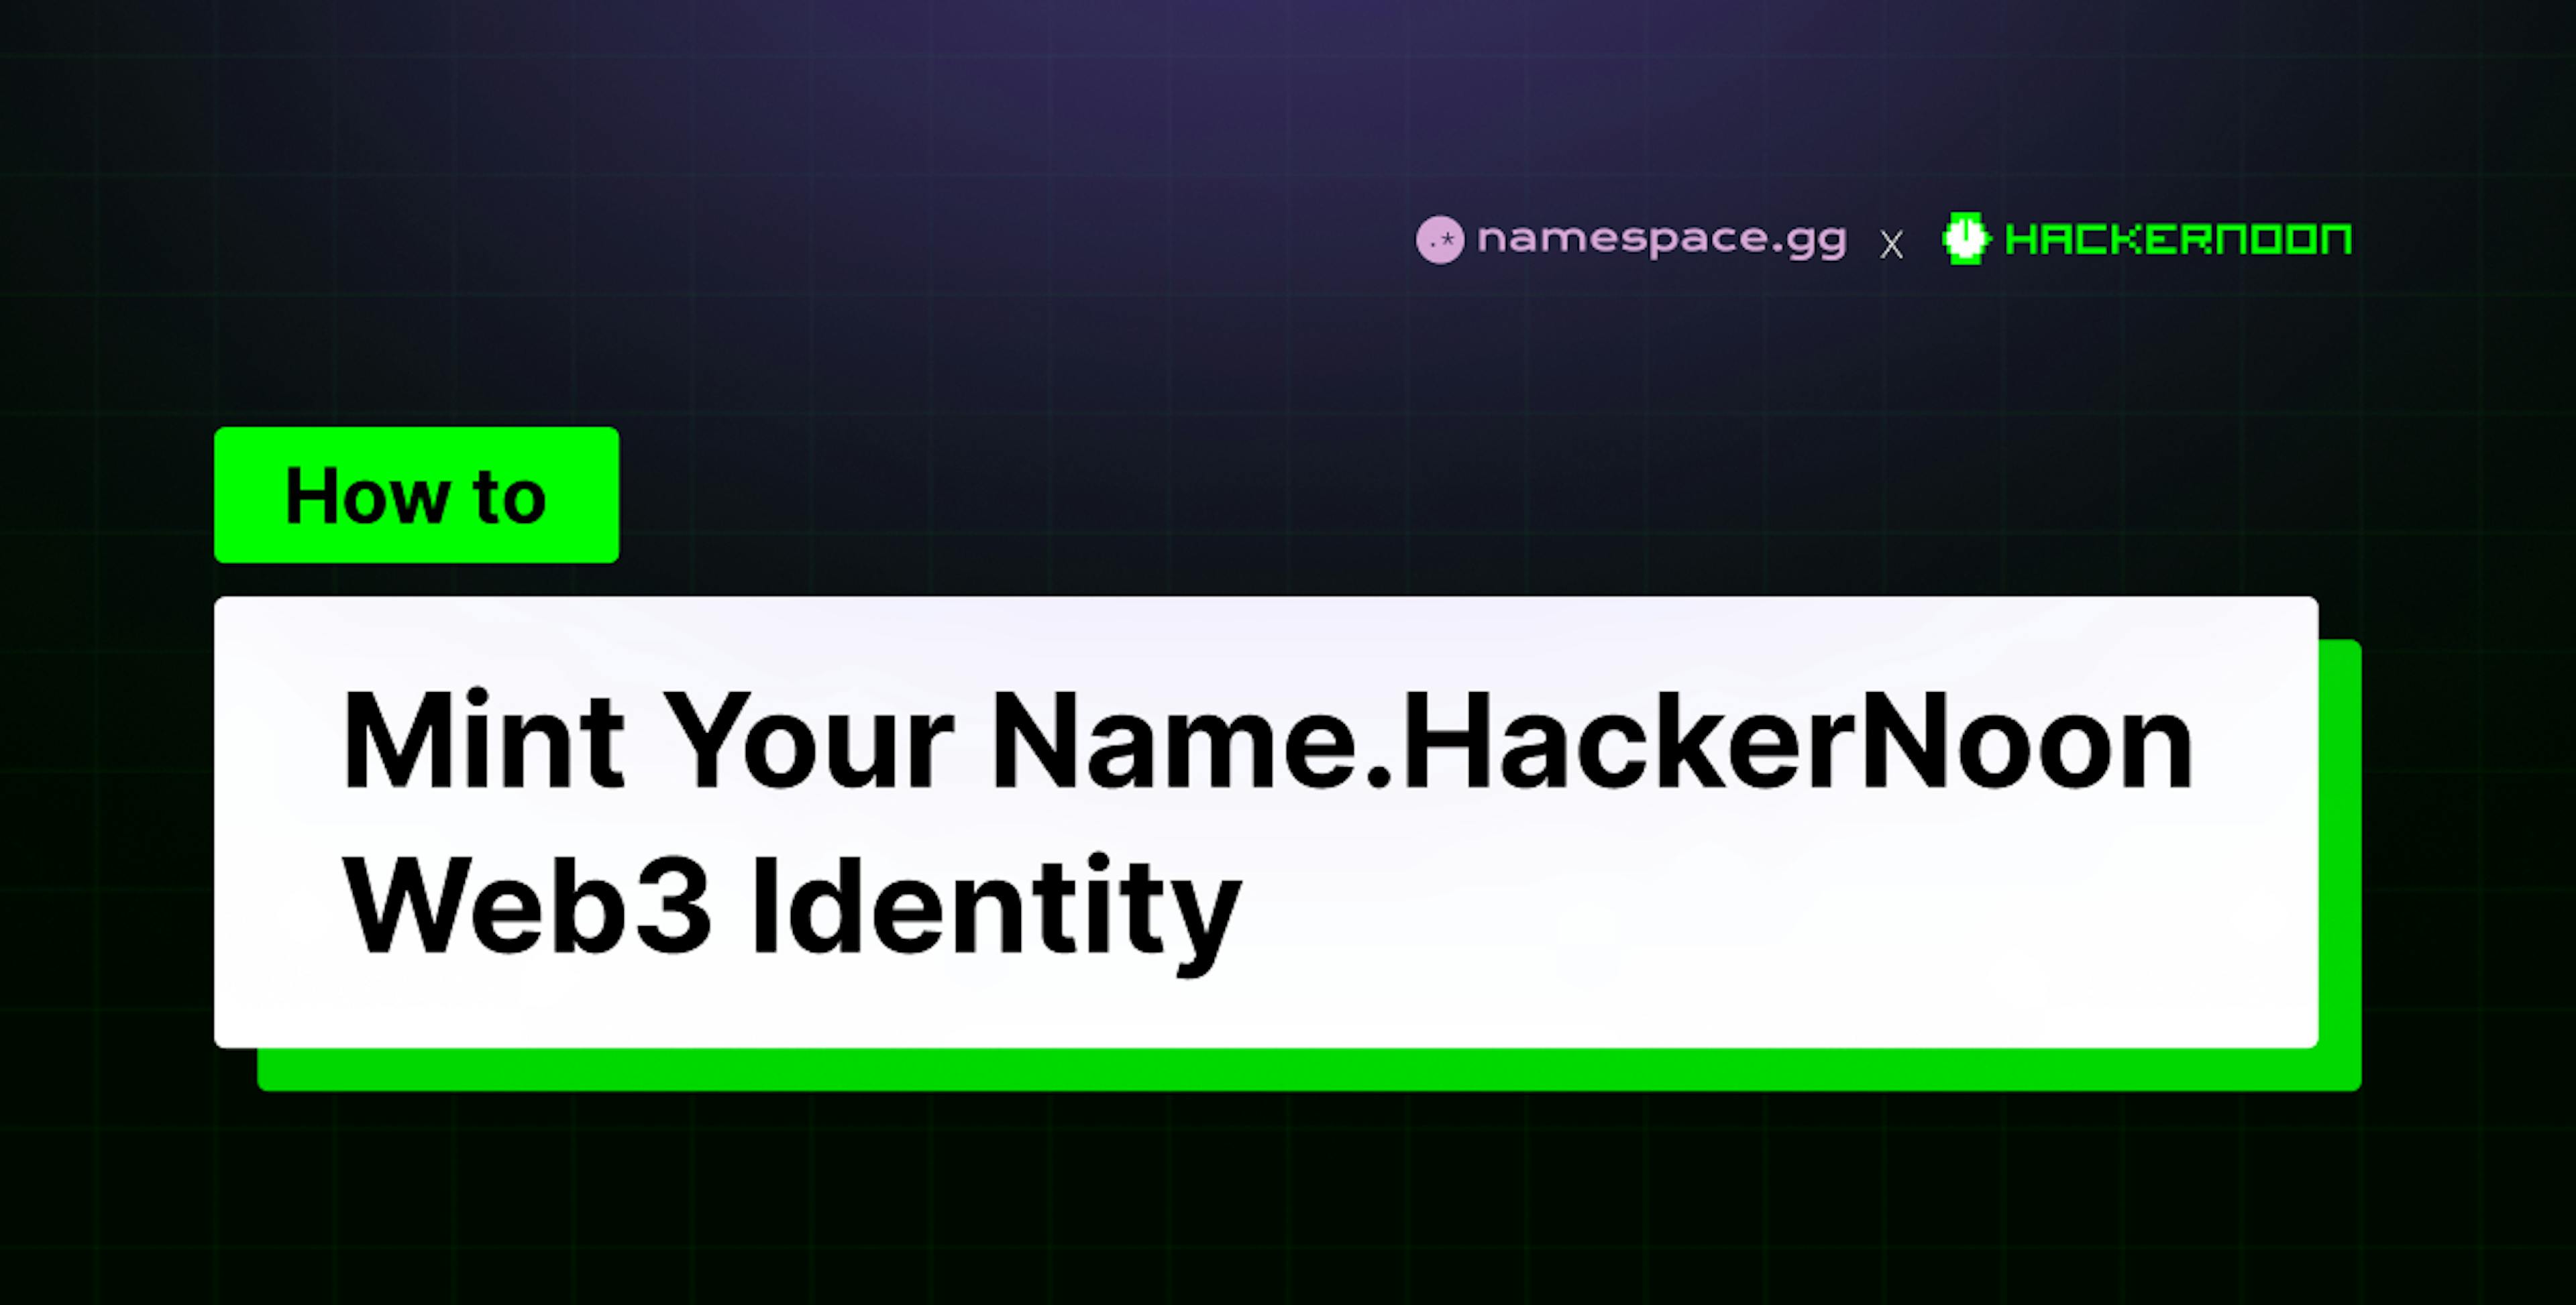 featured image - How to Mint Your Name.HackerNoon Web3 Identity Namespace